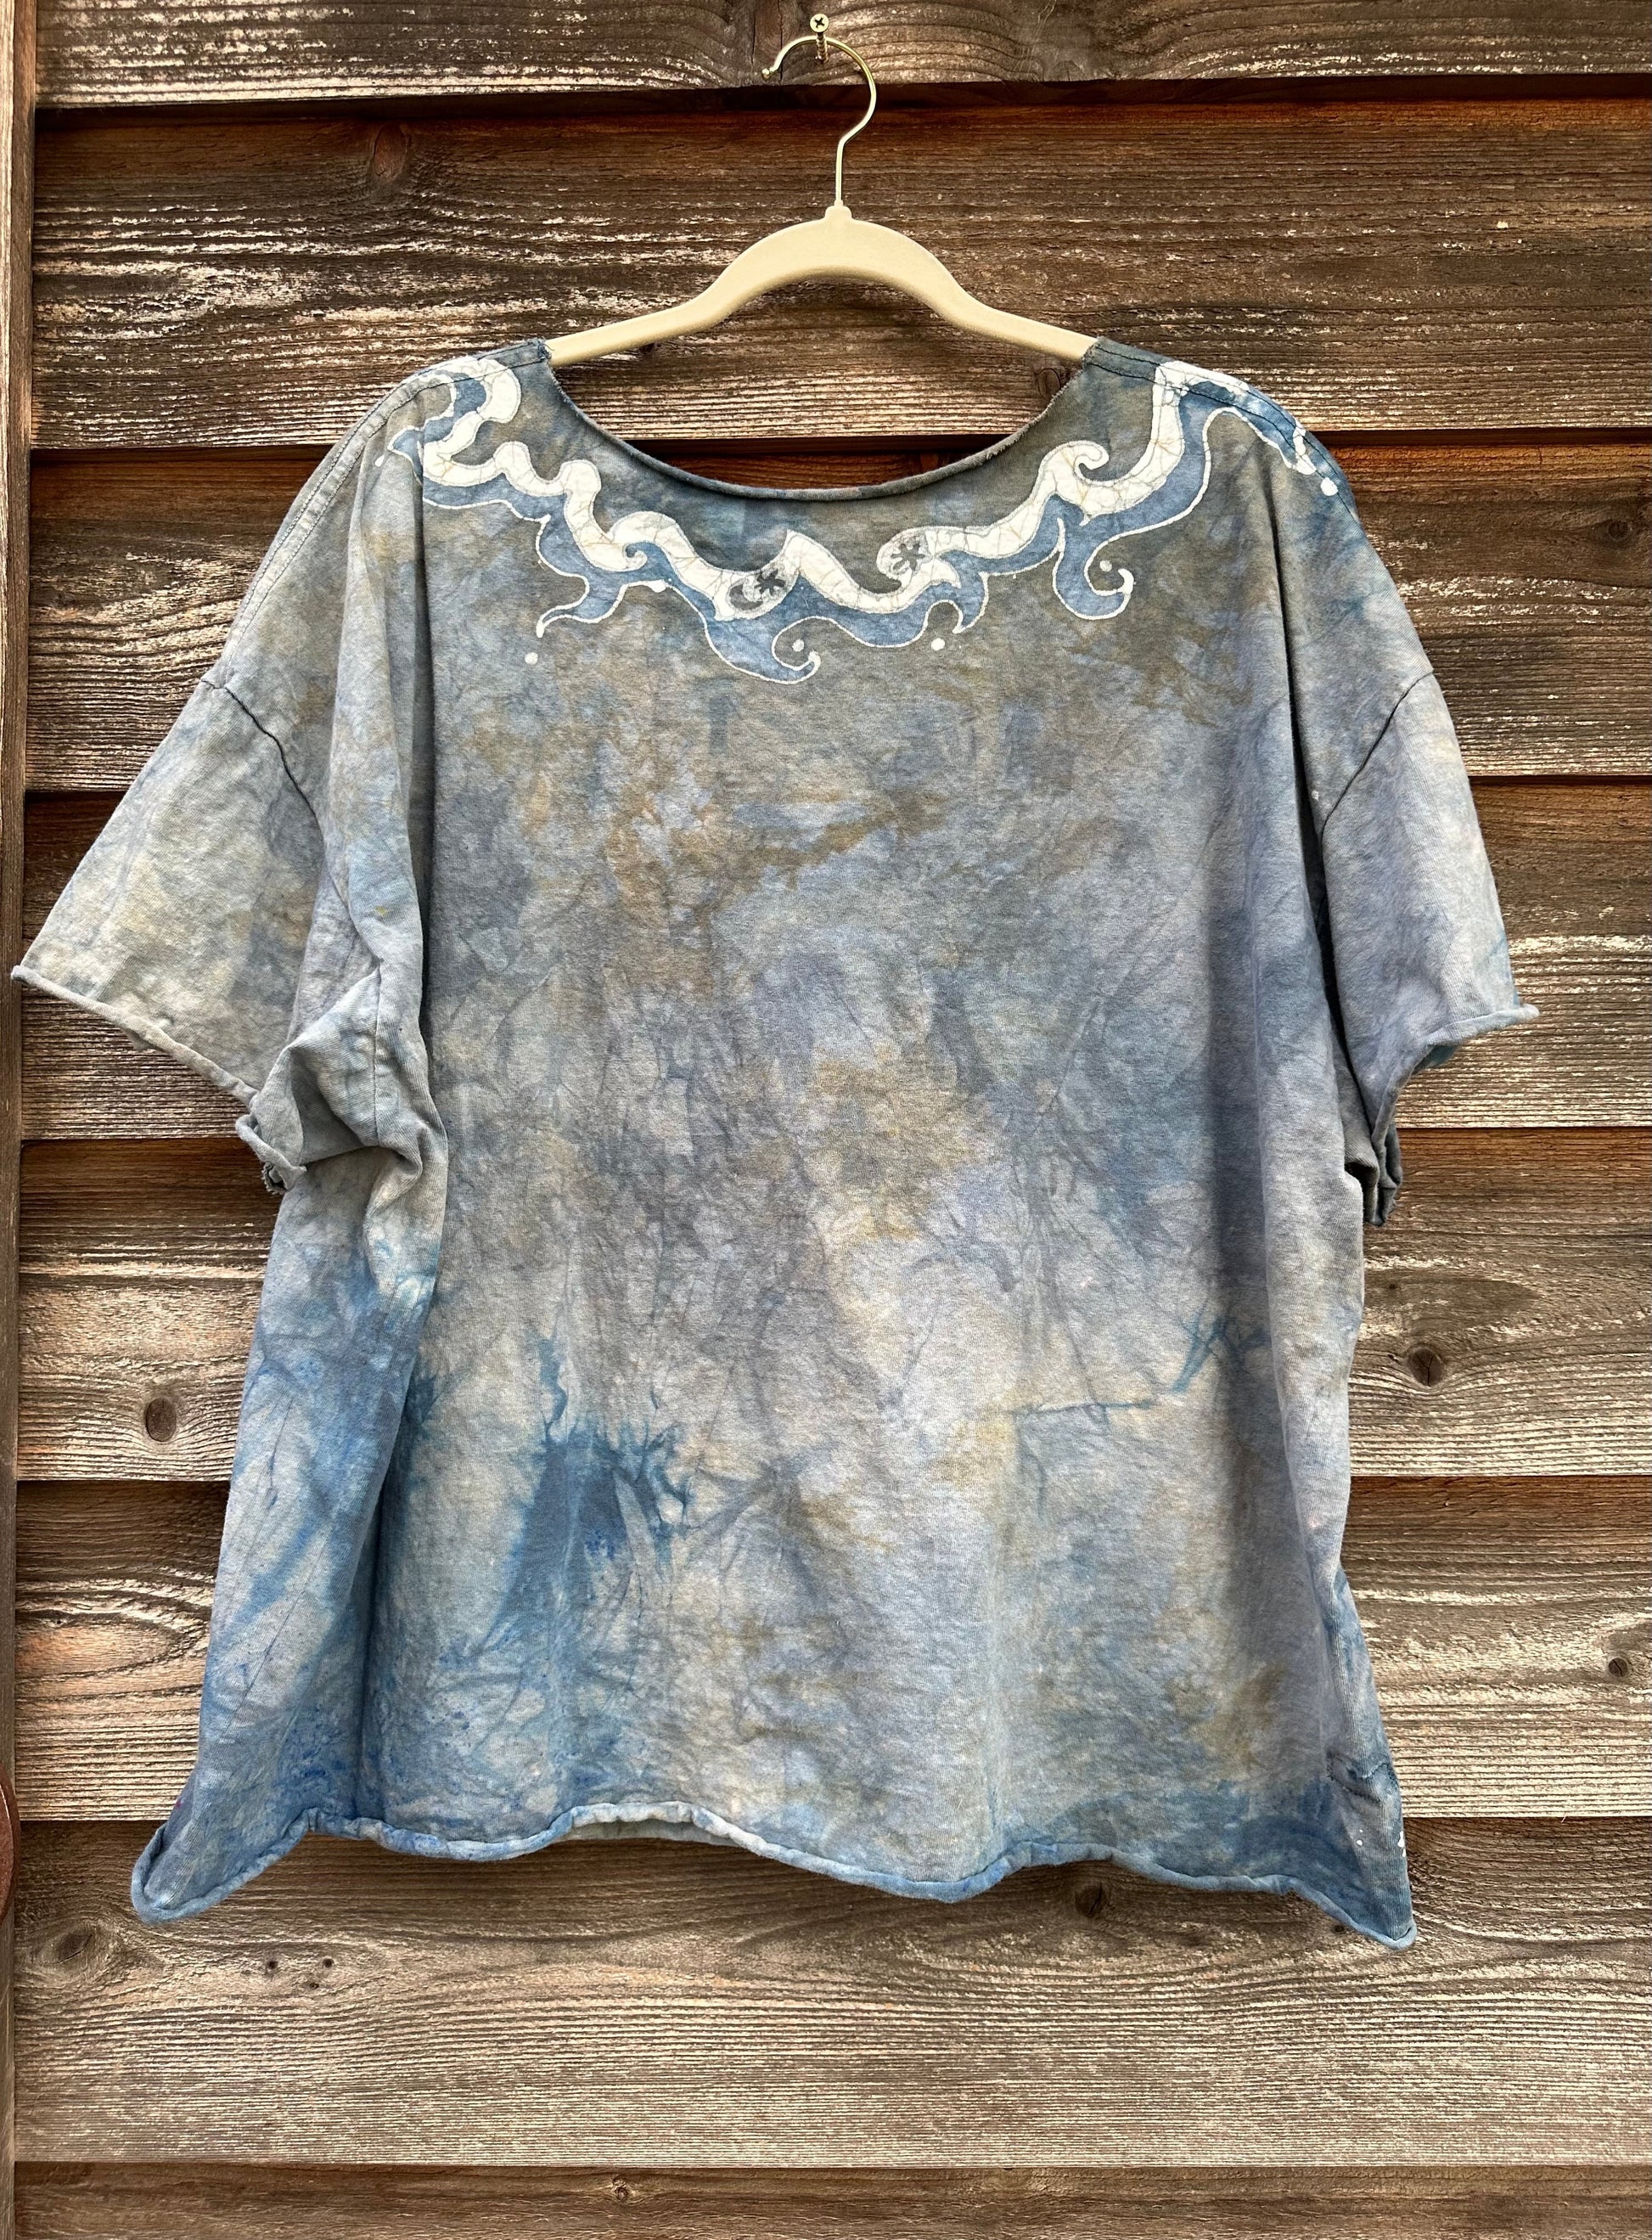 High Prairie Necklace Tee - Size 2X Shirts & Tops Batikwalla by Victoria 